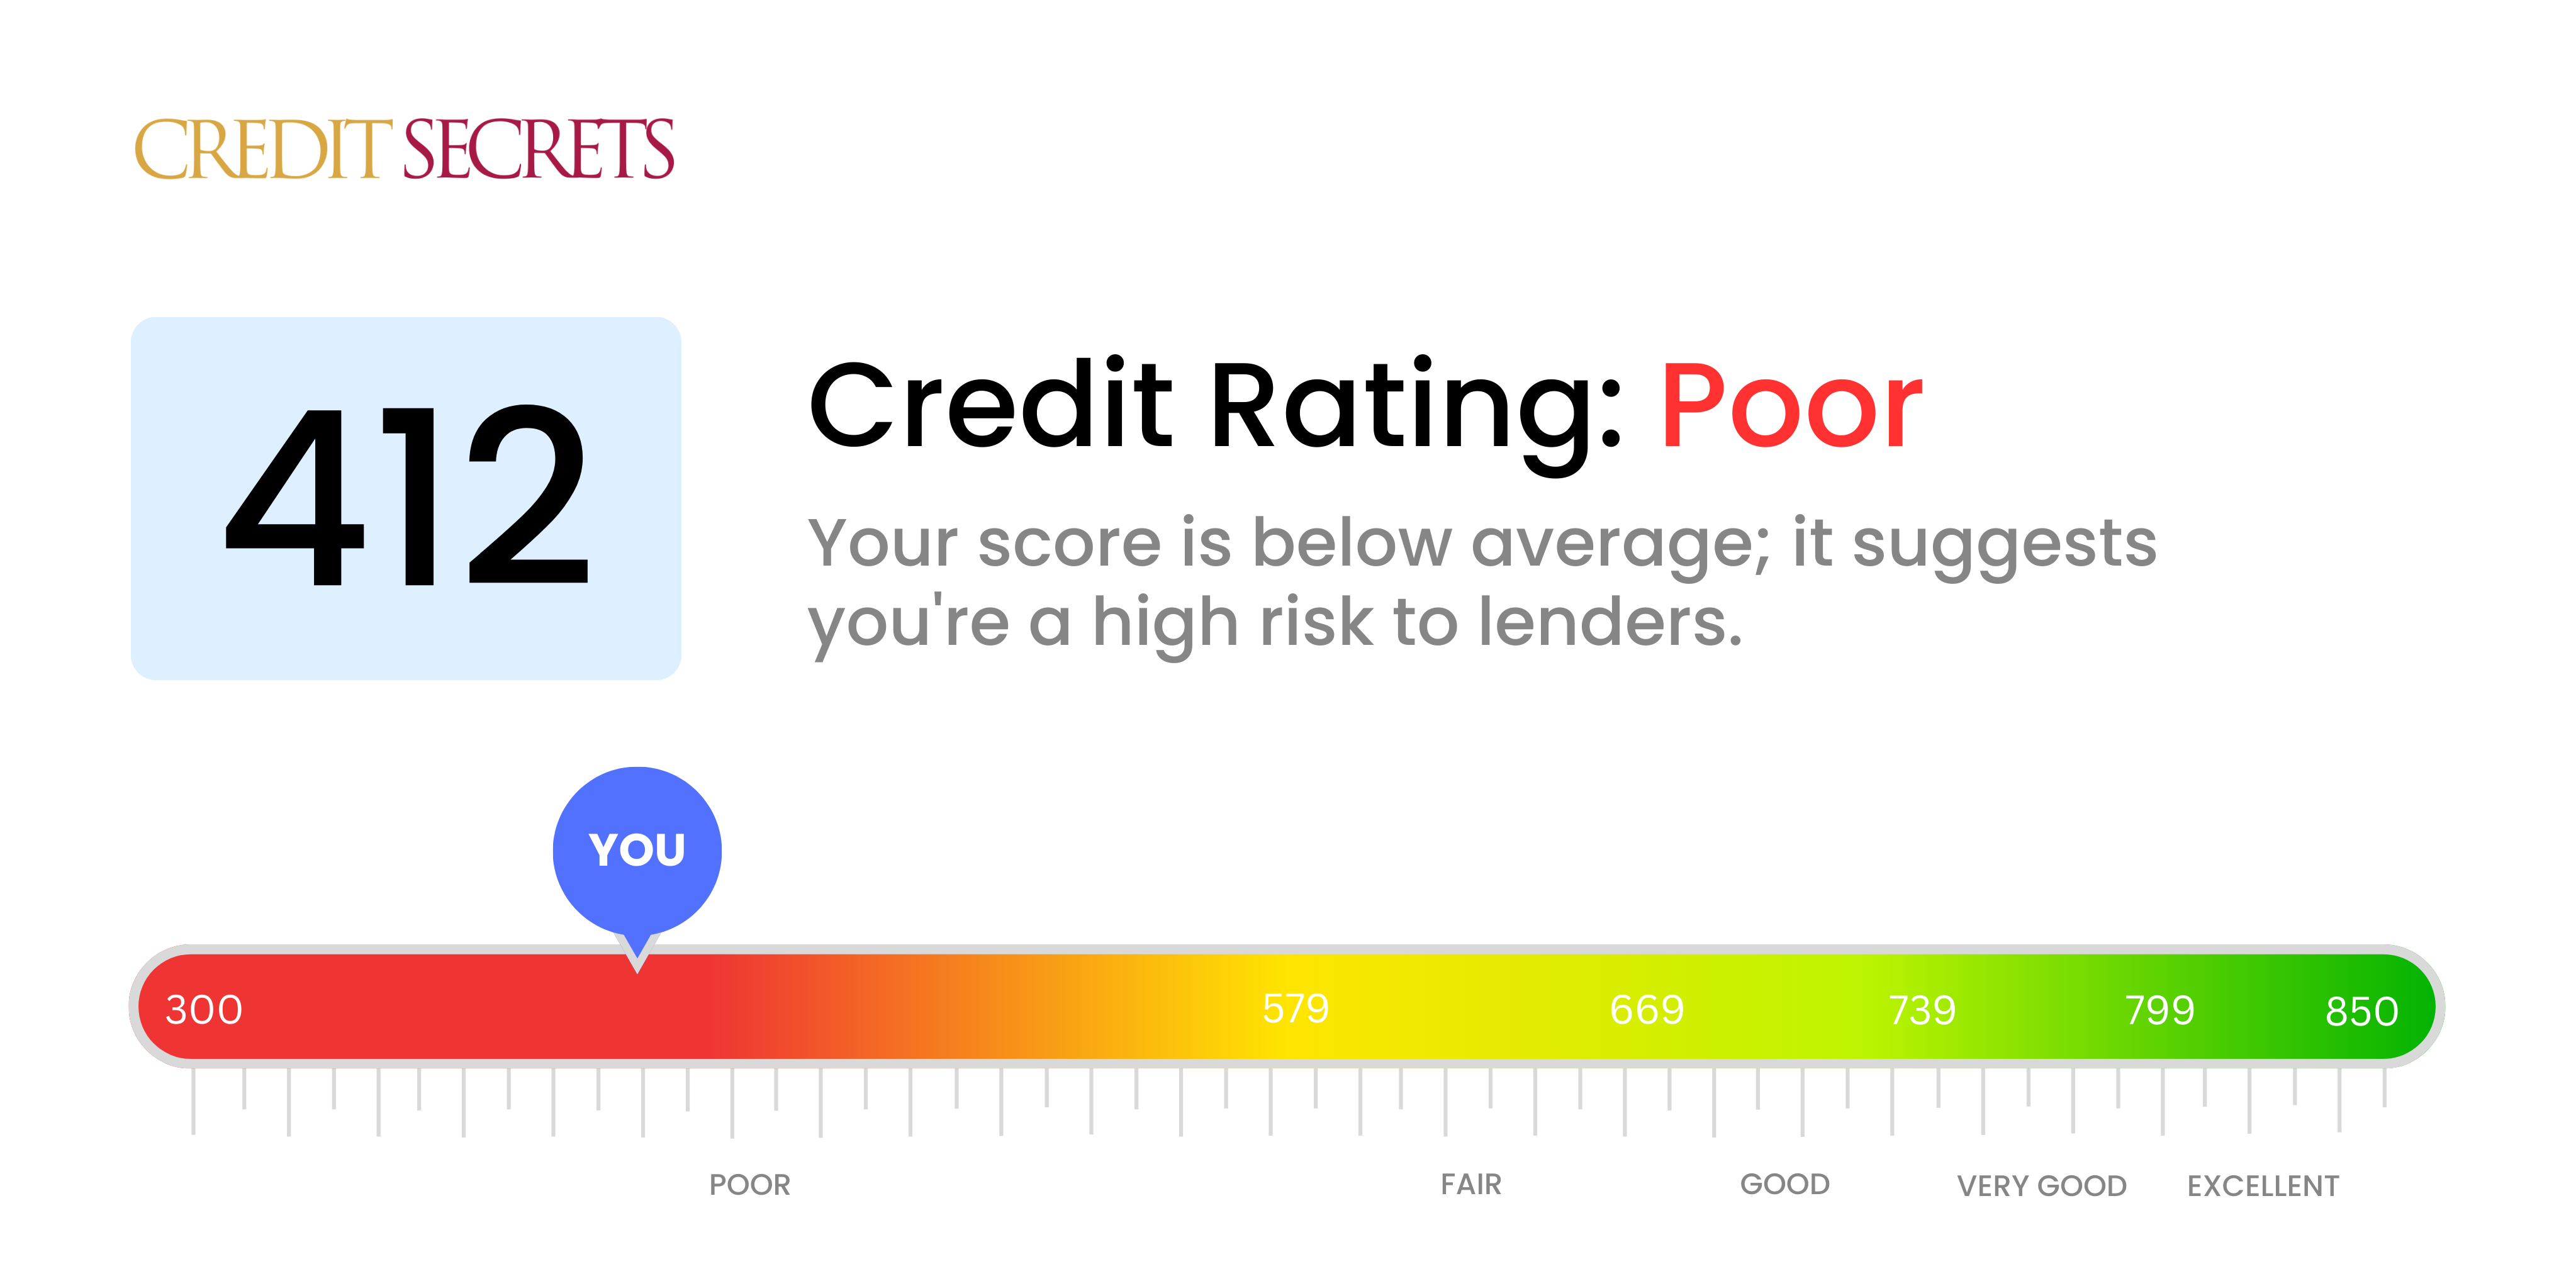 Is 412 a good credit score?